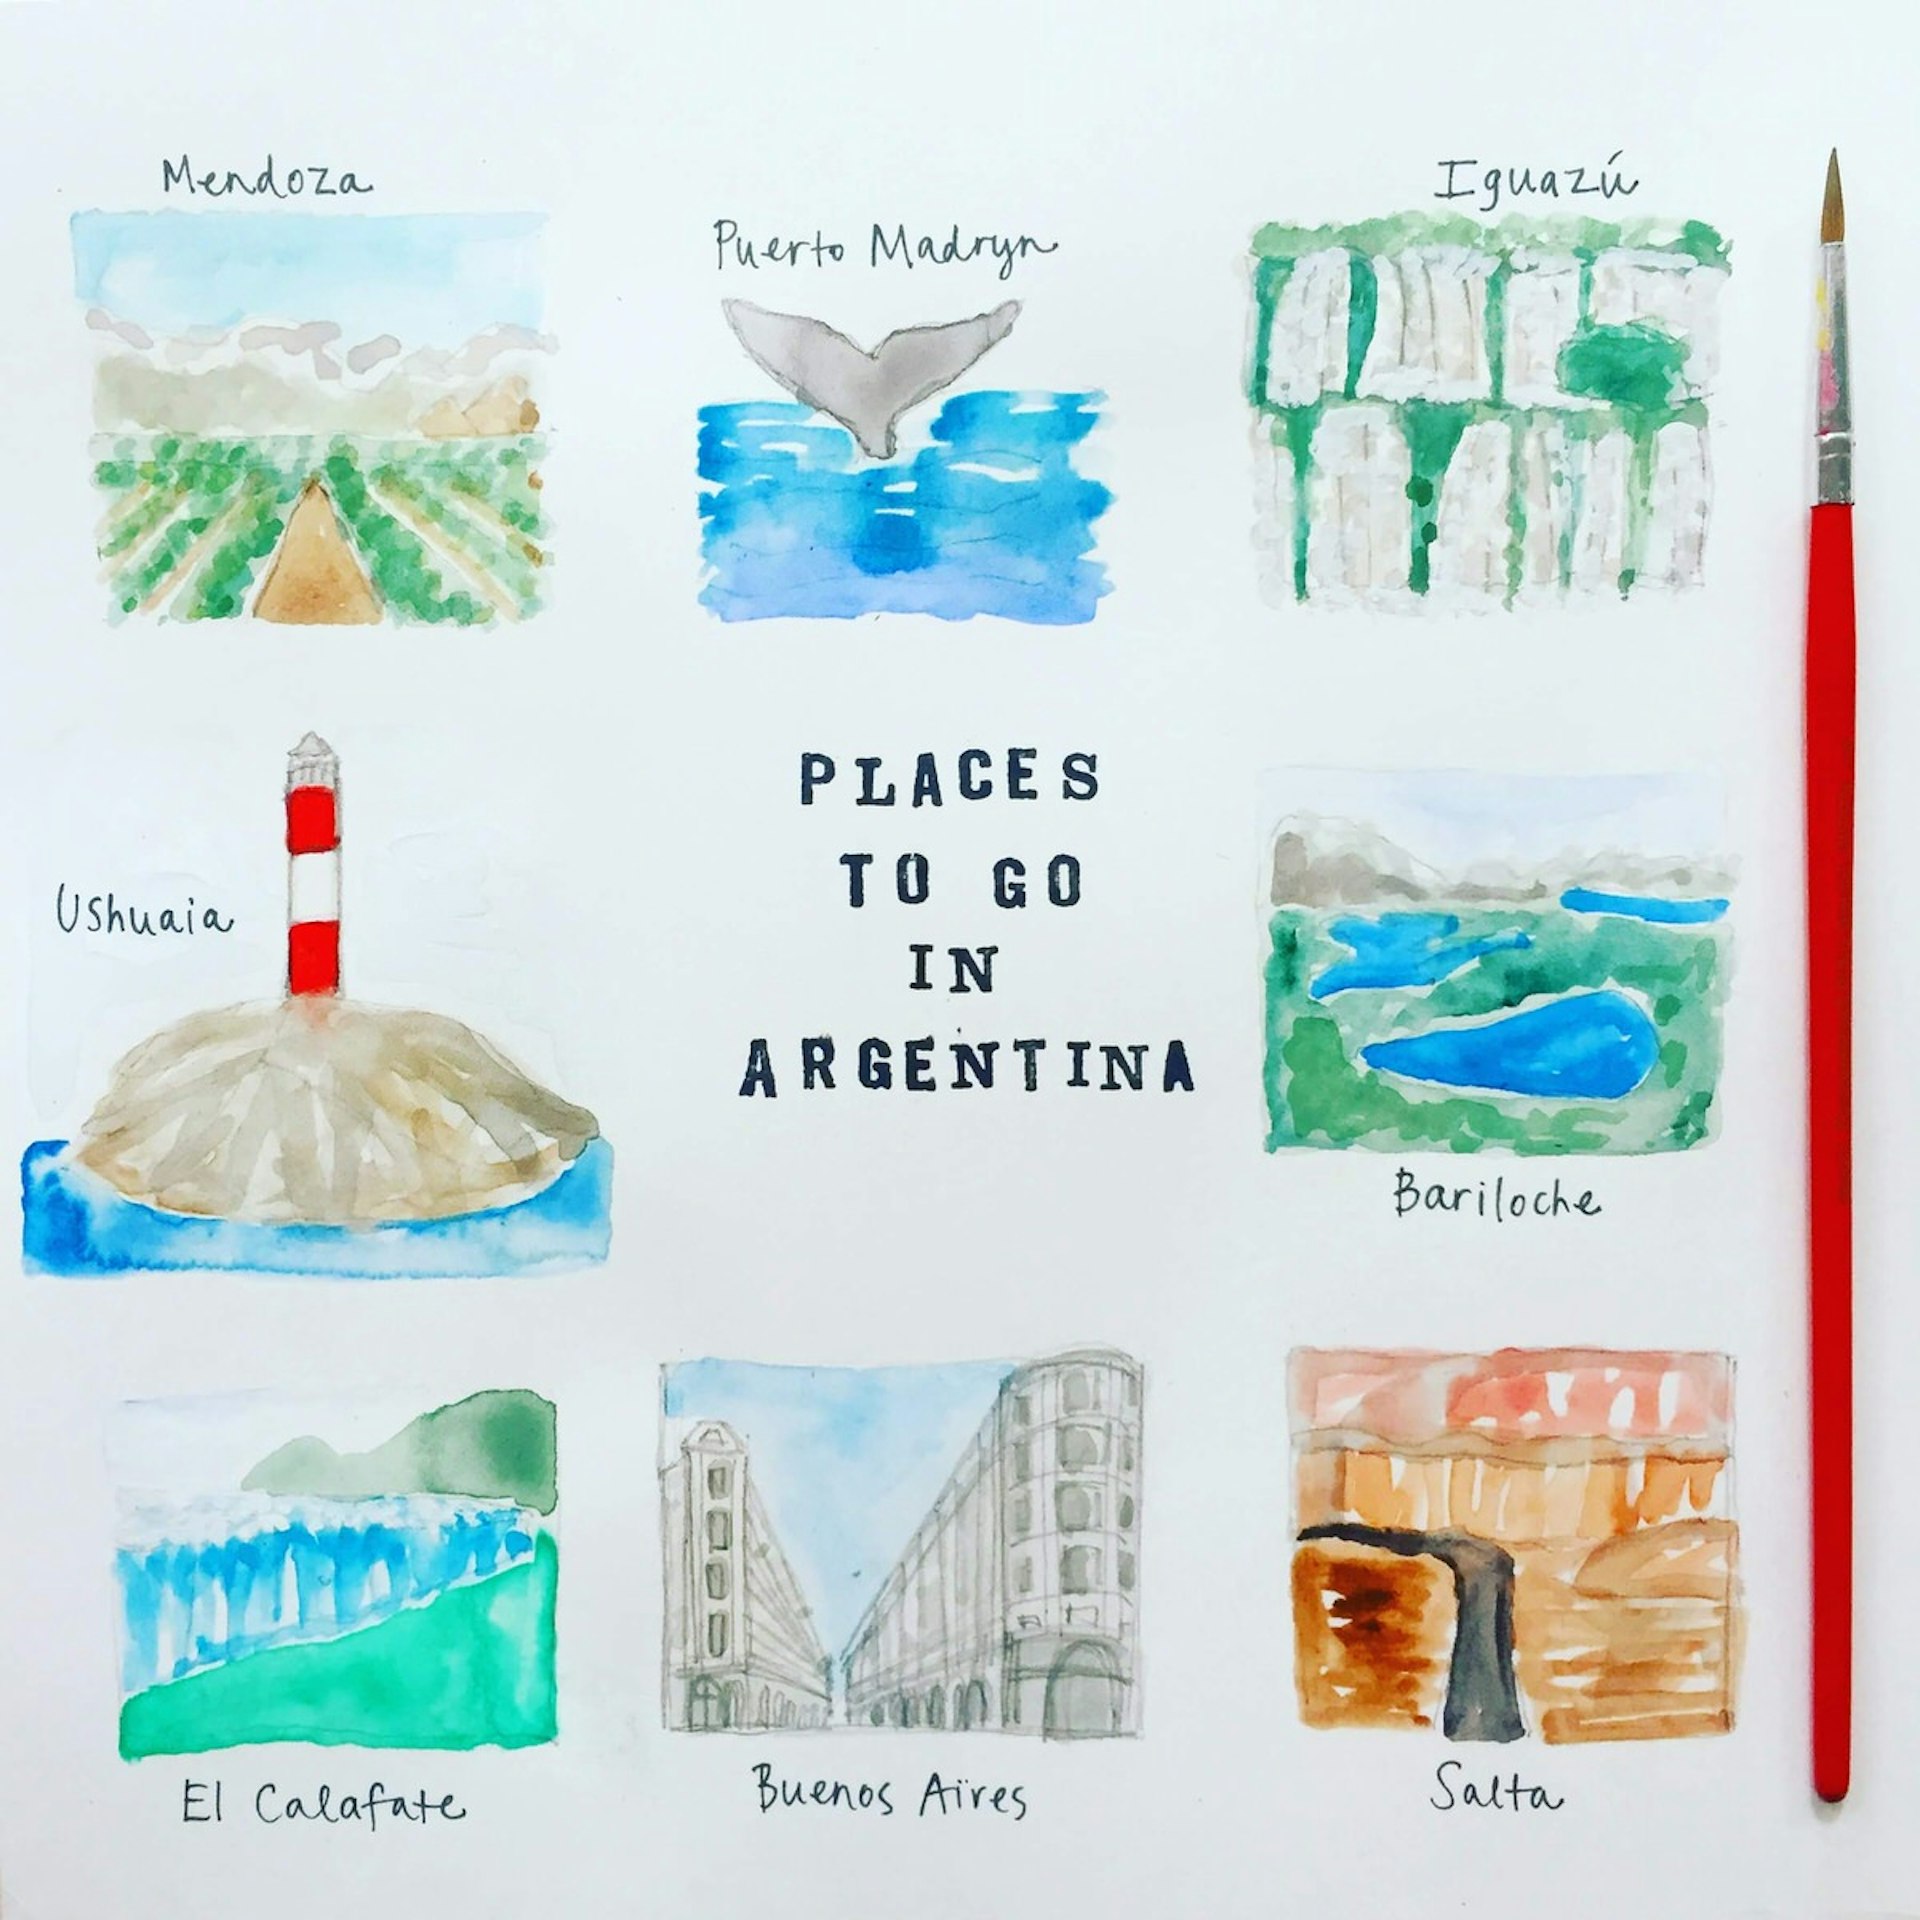 The writer's sketch of places to go in Argentina